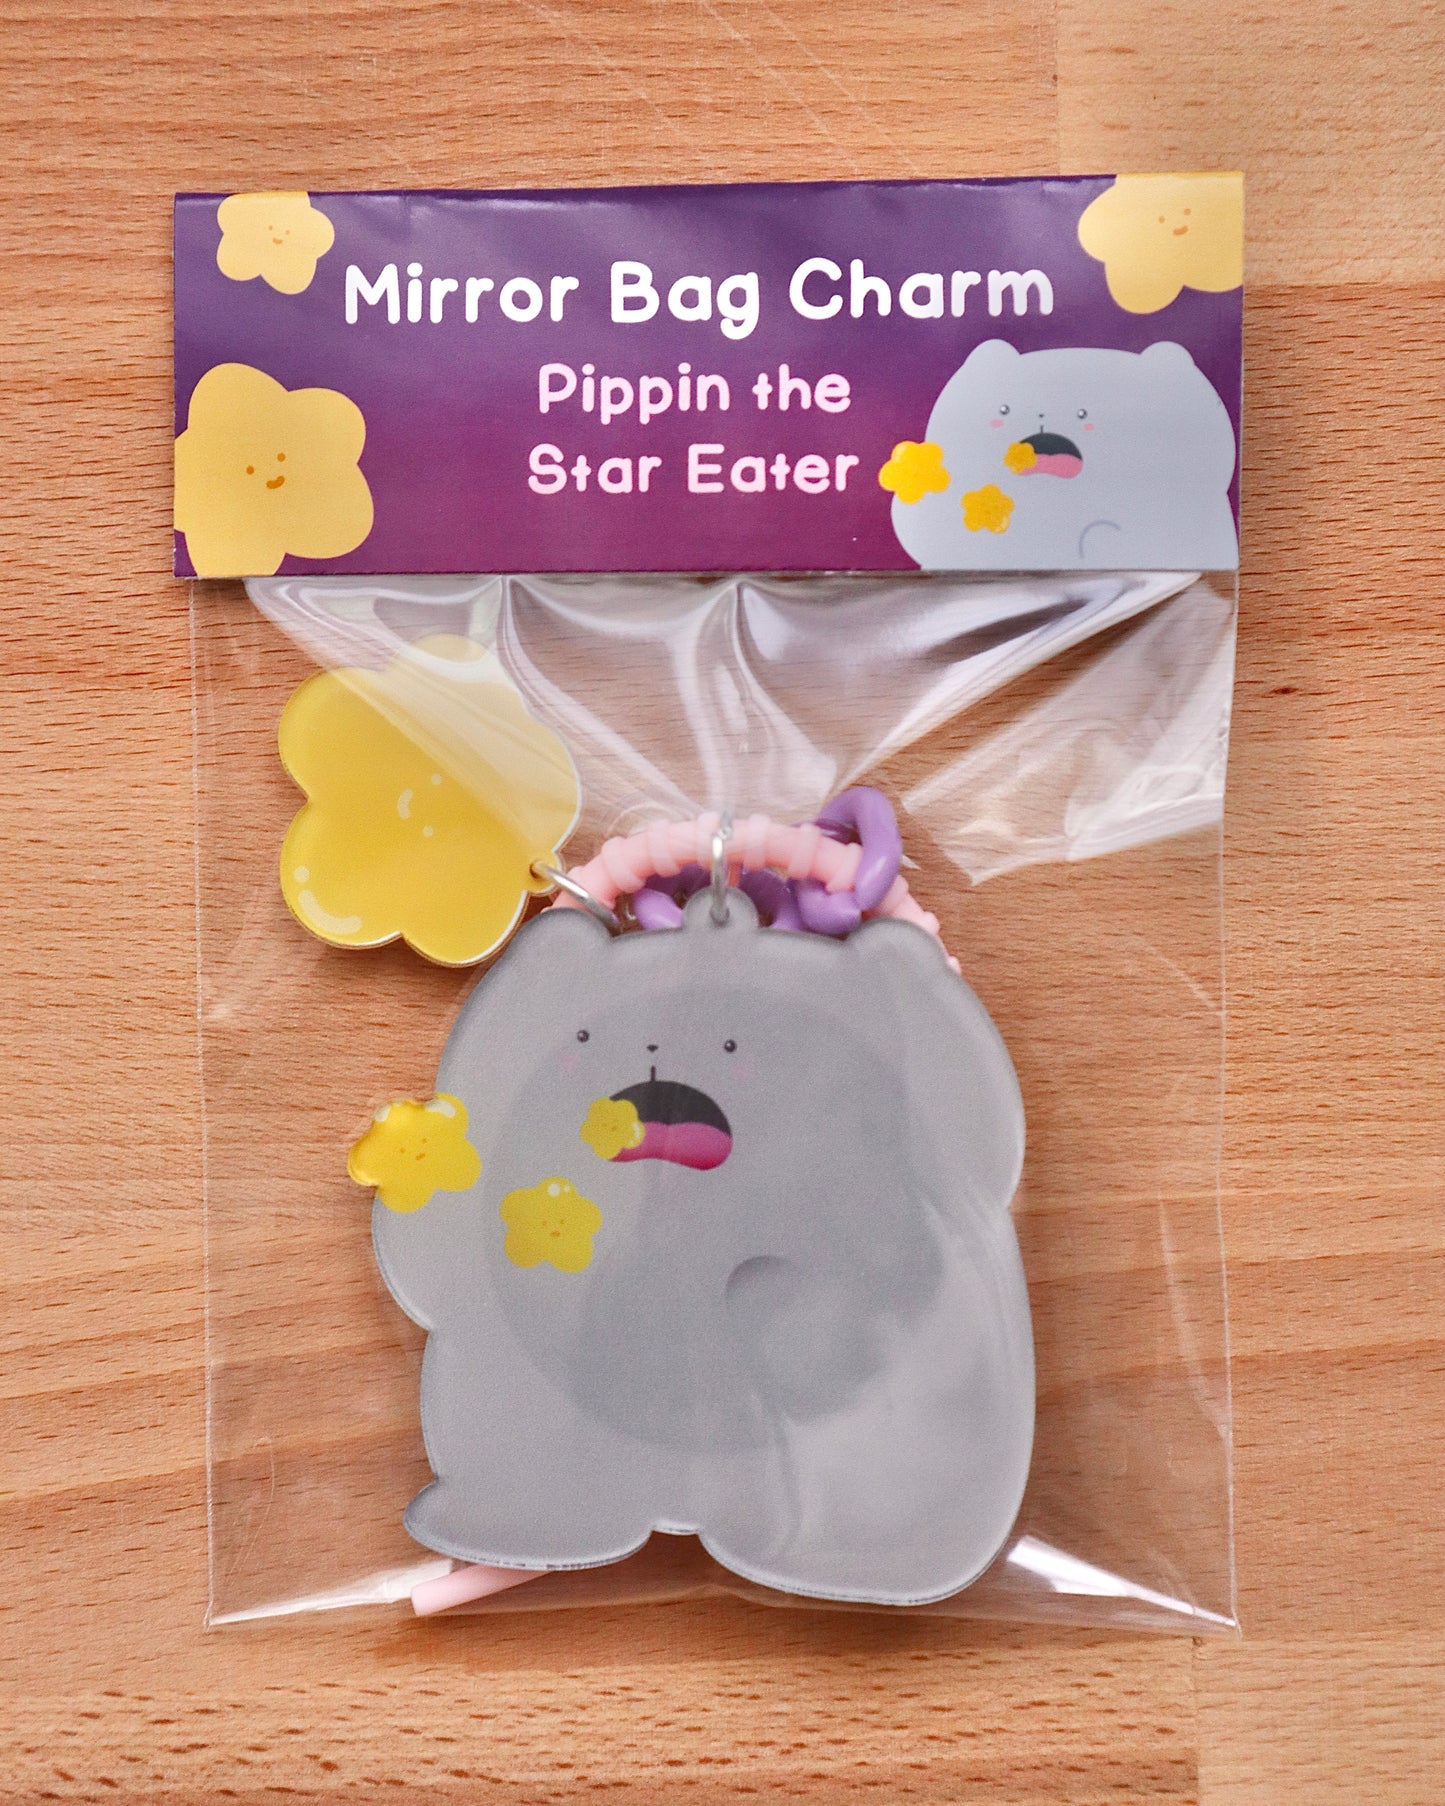 Pippin Star Eater Mirror Bag Charm